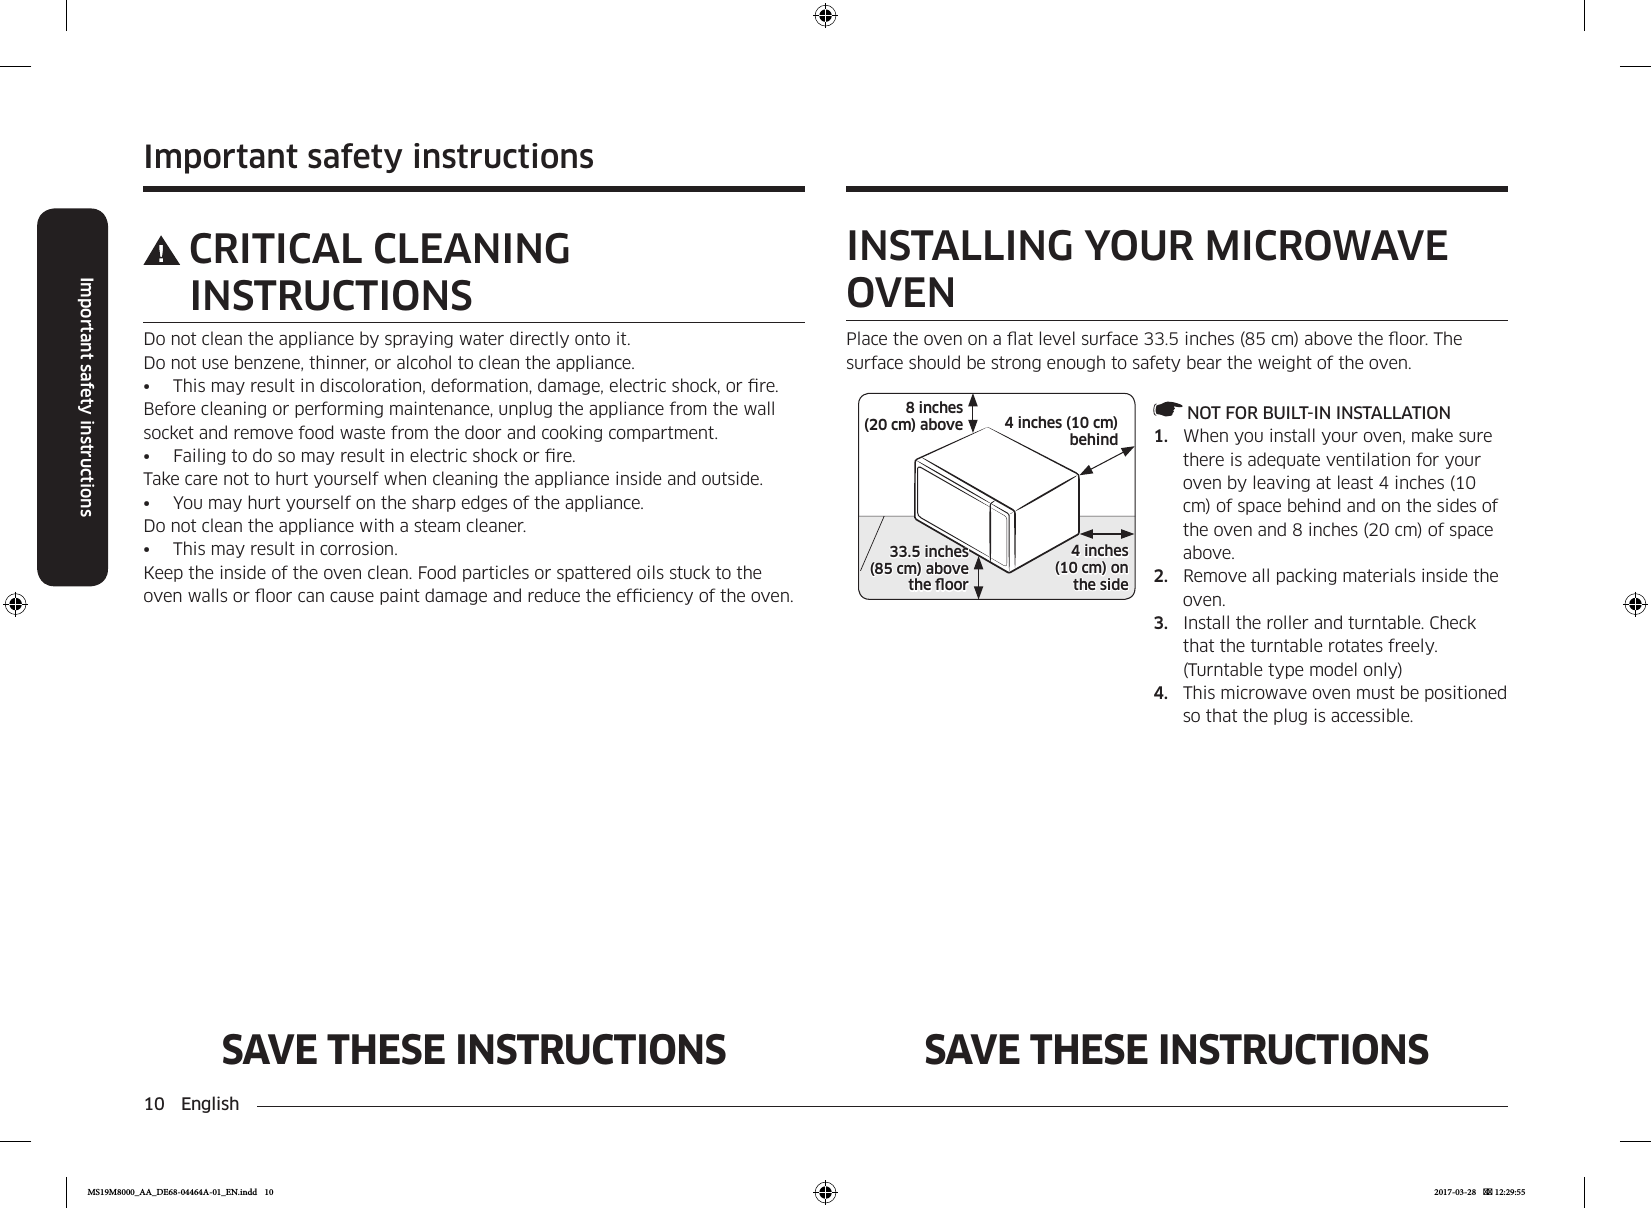 10 EnglishImportant safety instructionsImportant safety instructionsSAVE THESE INSTRUCTIONS SAVE THESE INSTRUCTIONSCRITICAL CLEANING INSTRUCTIONSDo not clean the appliance by spraying water directly onto it.Do not use benzene, thinner, or alcohol to clean the appliance. •  This may result in discoloration, deformation, damage, electric shock, or re. Before cleaning or performing maintenance, unplug the appliance from the wall socket and remove food waste from the door and cooking compartment.•  Failing to do so may result in electric shock or re.Take care not to hurt yourself when cleaning the appliance inside and outside.•  You may hurt yourself on the sharp edges of the appliance. Do not clean the appliance with a steam cleaner. •  This may result in corrosion. Keep the inside of the oven clean. Food particles or spattered oils stuck to the oven walls or oor can cause paint damage and reduce the efciency of the oven.INSTALLING YOUR MICROWAVE OVENPlace the oven on a at level surface 33.5 inches (85 cm) above the oor. The surface should be strong enough to safety bear the weight of the oven.4 inches (10 cm)  behind8 inches (20 cm) above4 inches  (10 cm) onthe side33.5 inches  (85 cm) above the oor NOT FOR BUILT-IN INSTALLATION1.  When you install your oven, make sure there is adequate ventilation for your oven by leaving at least 4 inches (10 cm) of space behind and on the sides of the oven and 8 inches (20 cm) of space above.2.  Remove all packing materials inside the oven.3.  Install the roller and turntable. Check that the turntable rotates freely. (Turntable type model only)4.  This microwave oven must be positioned so that the plug is accessible.MS19M8000_AA_DE68-04464A-01_EN.indd   10 2017-03-28    12:29:55